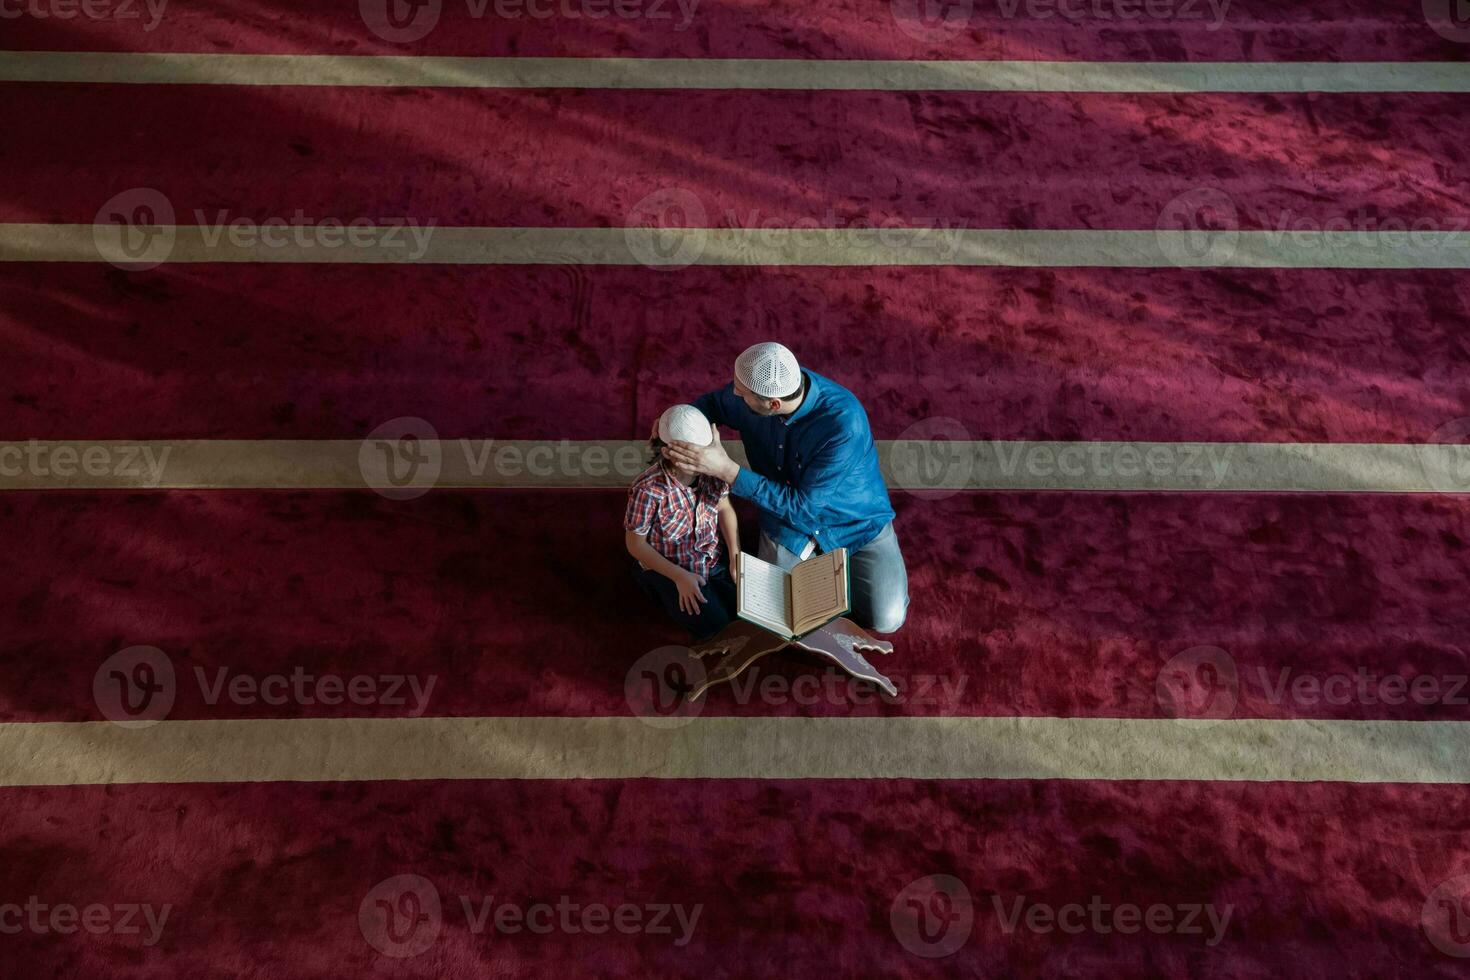 muslim prayer father and son in mosque praying and reading holly book quran together islamic education concept photo